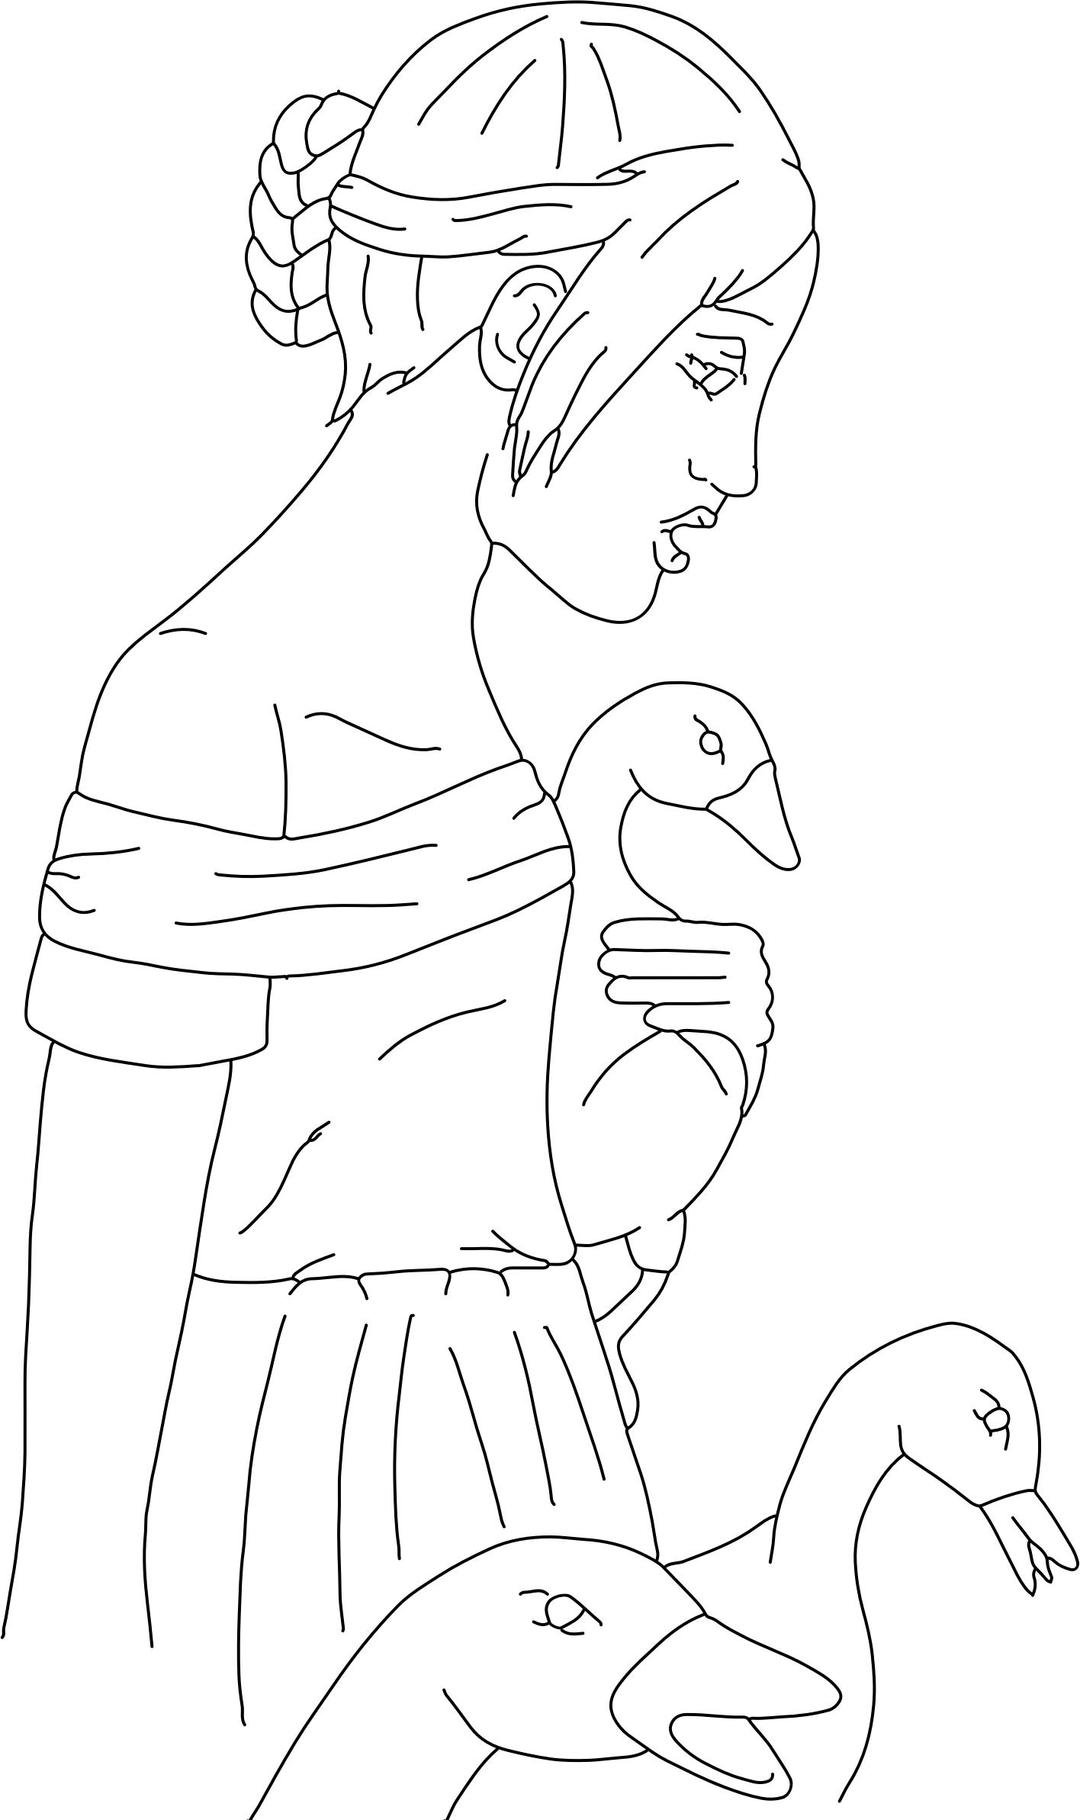 Girl With Ducks Strokes png transparent